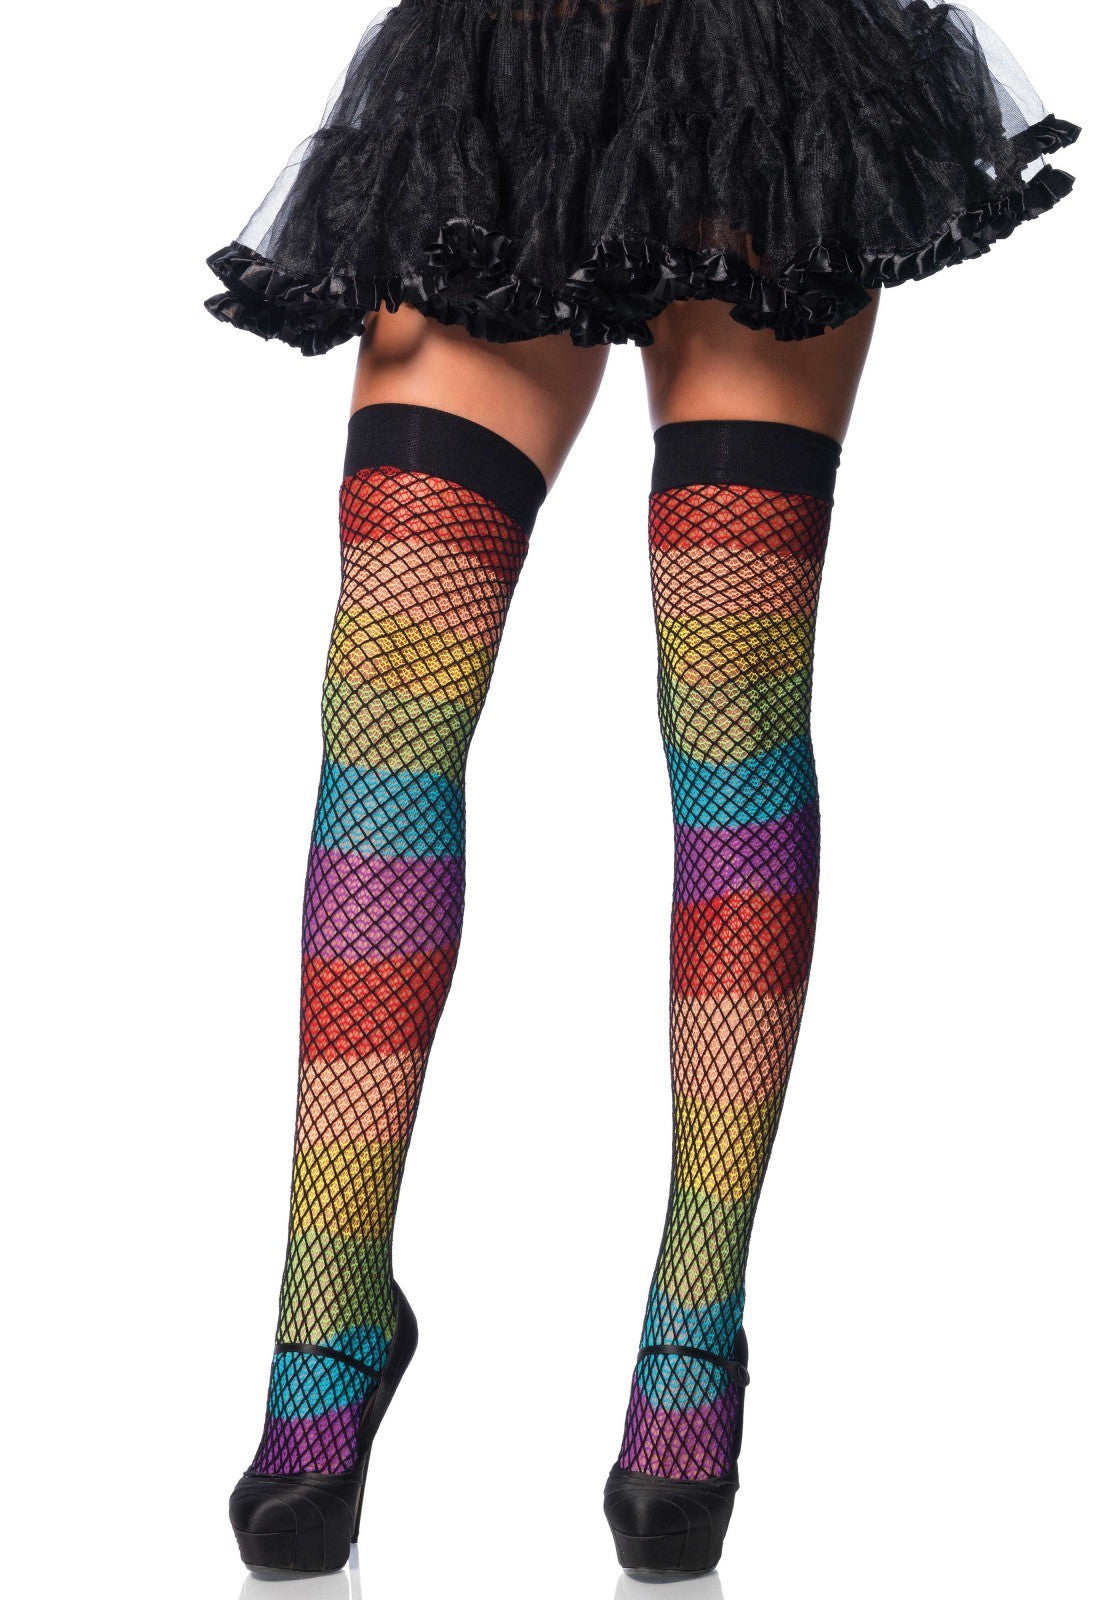 RAINBOW THIGH HIGHS WITH FISHNET OVERLAY